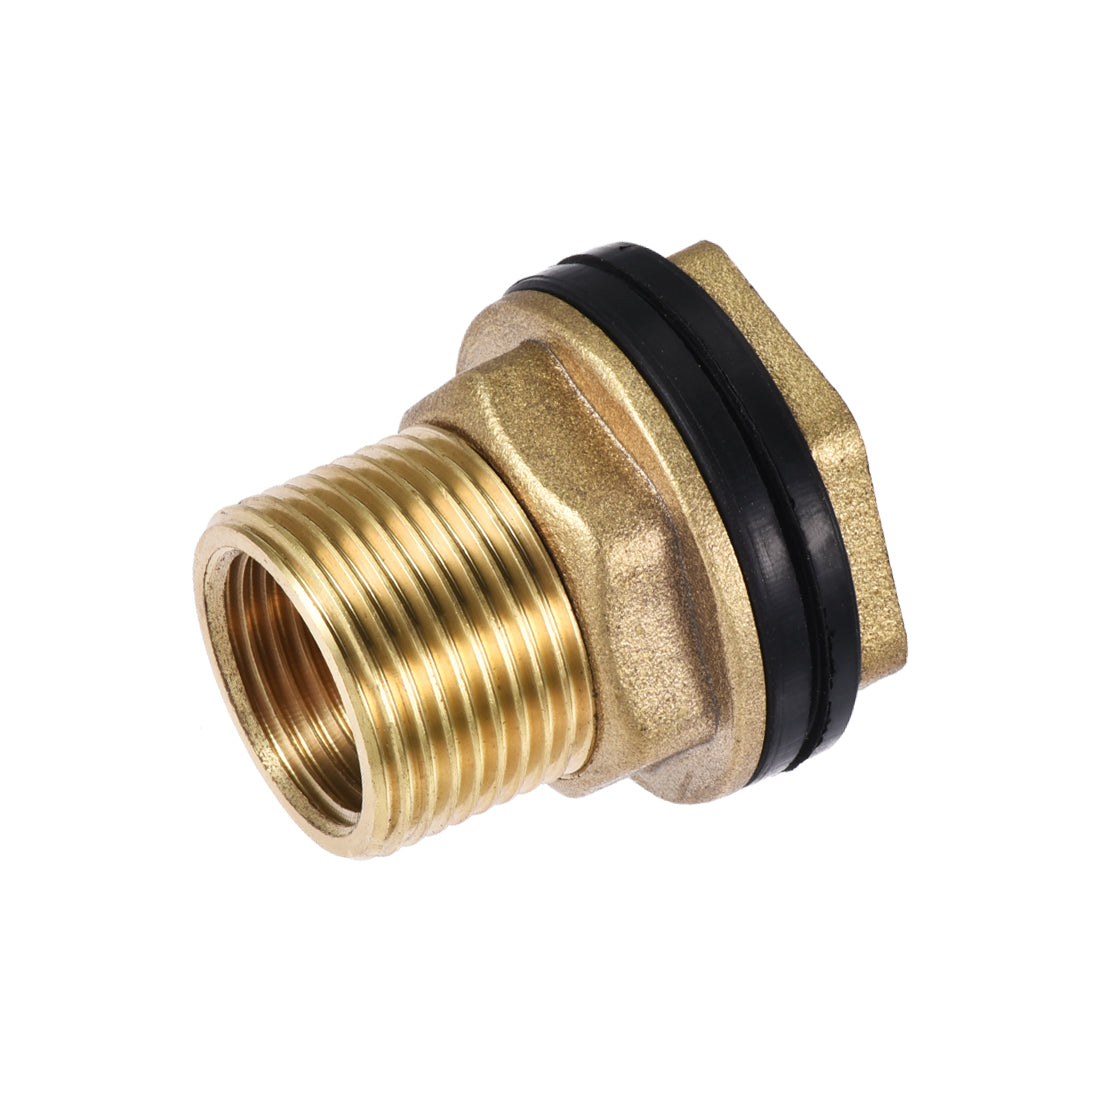 Uxcell Uxcell Bulkhead Fitting, BSPT3/8 Female G1/2 Male, Tube Adaptor Pipe Fitting with Silicone Gaskets, for Water Tanks, Brass